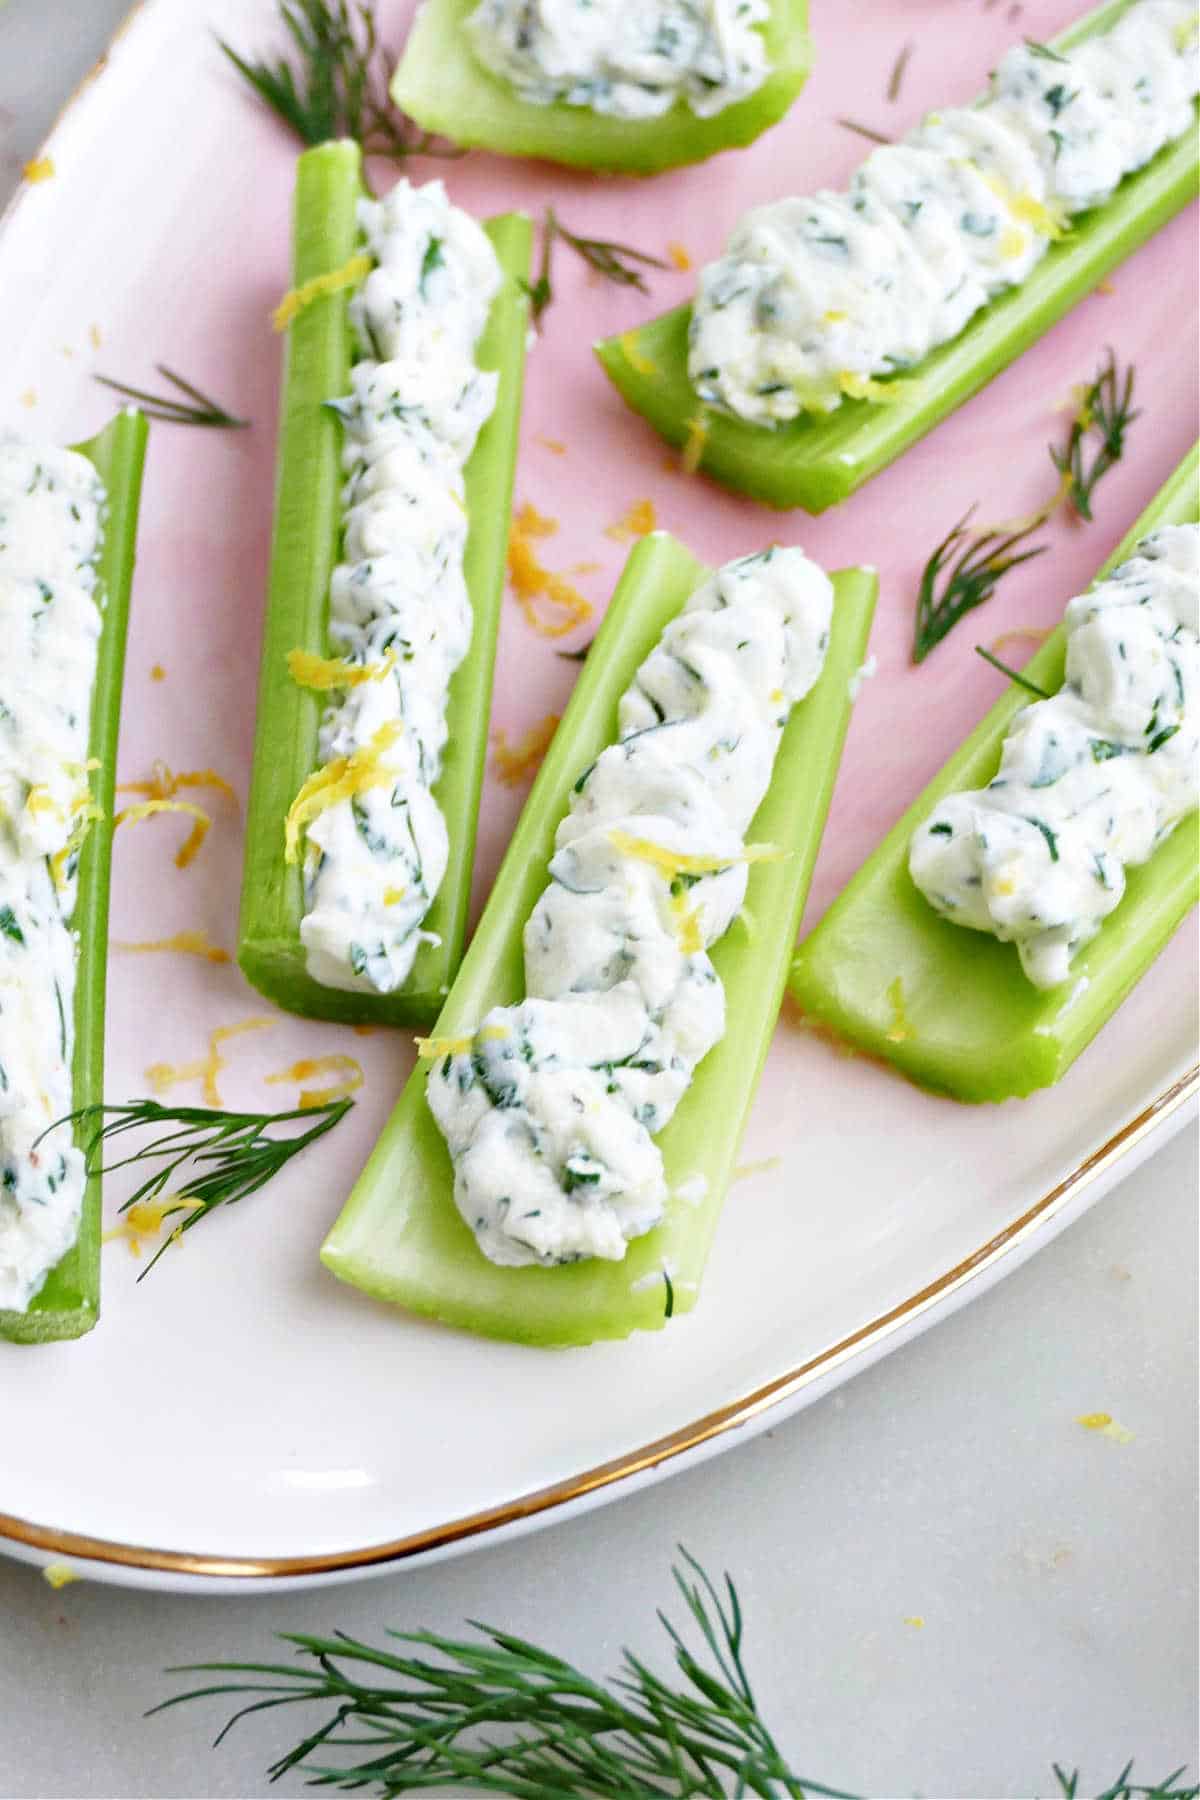 celery sticks with mascarpone cheese, herbs, and lemon on a serving tray